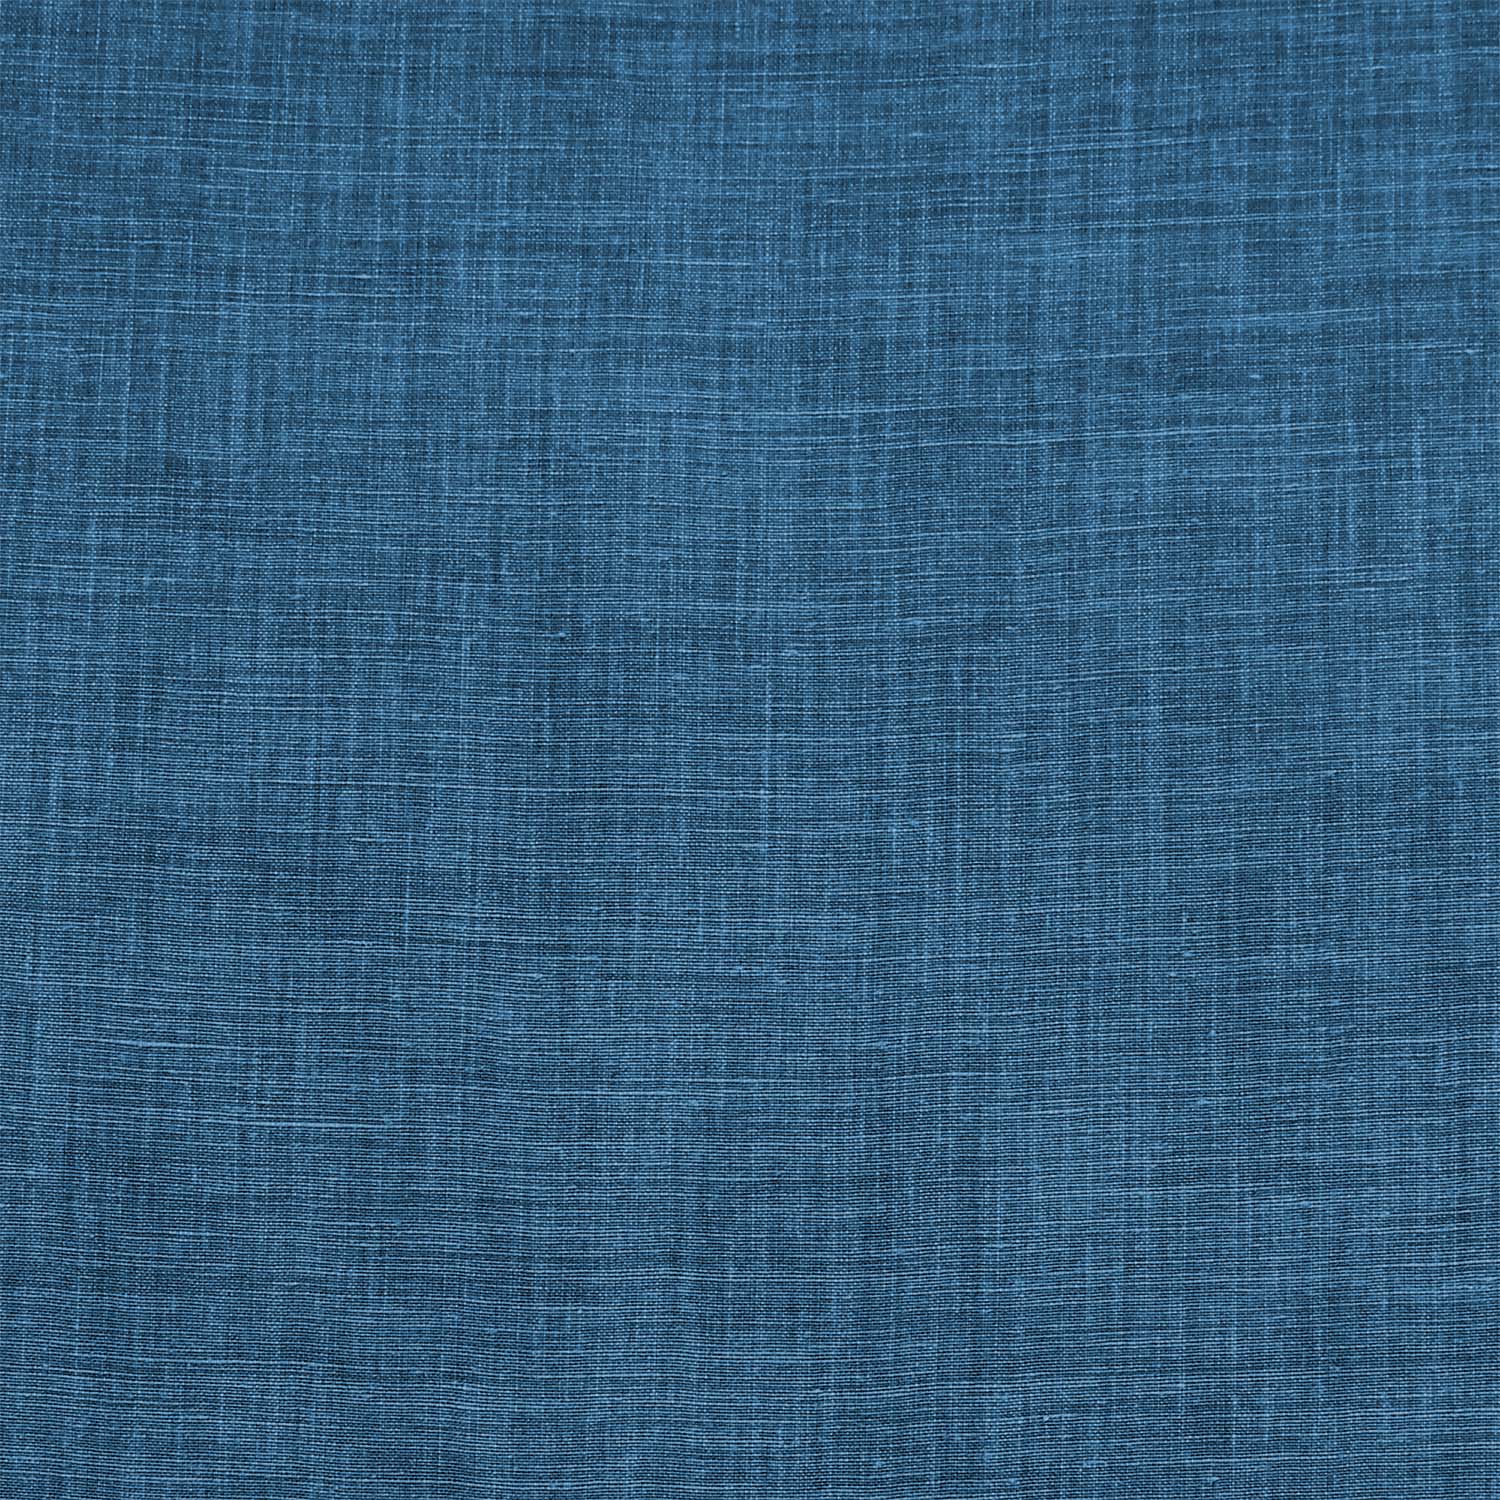 Laundered Linen - Prussian Blue